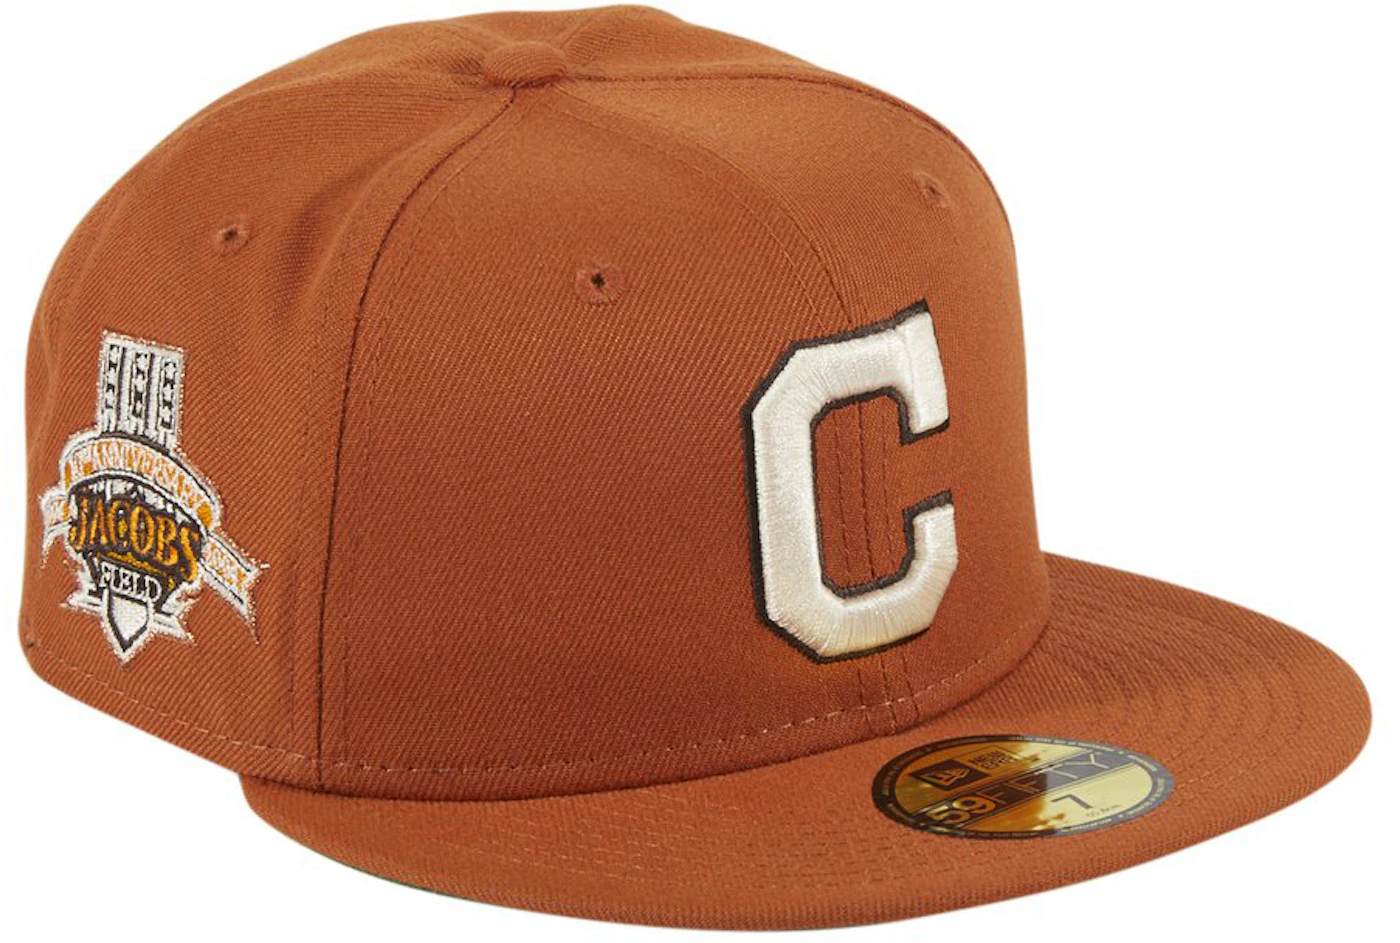 New Era Cleveland Indians 10th Anniversary Gold Prime Two Tone